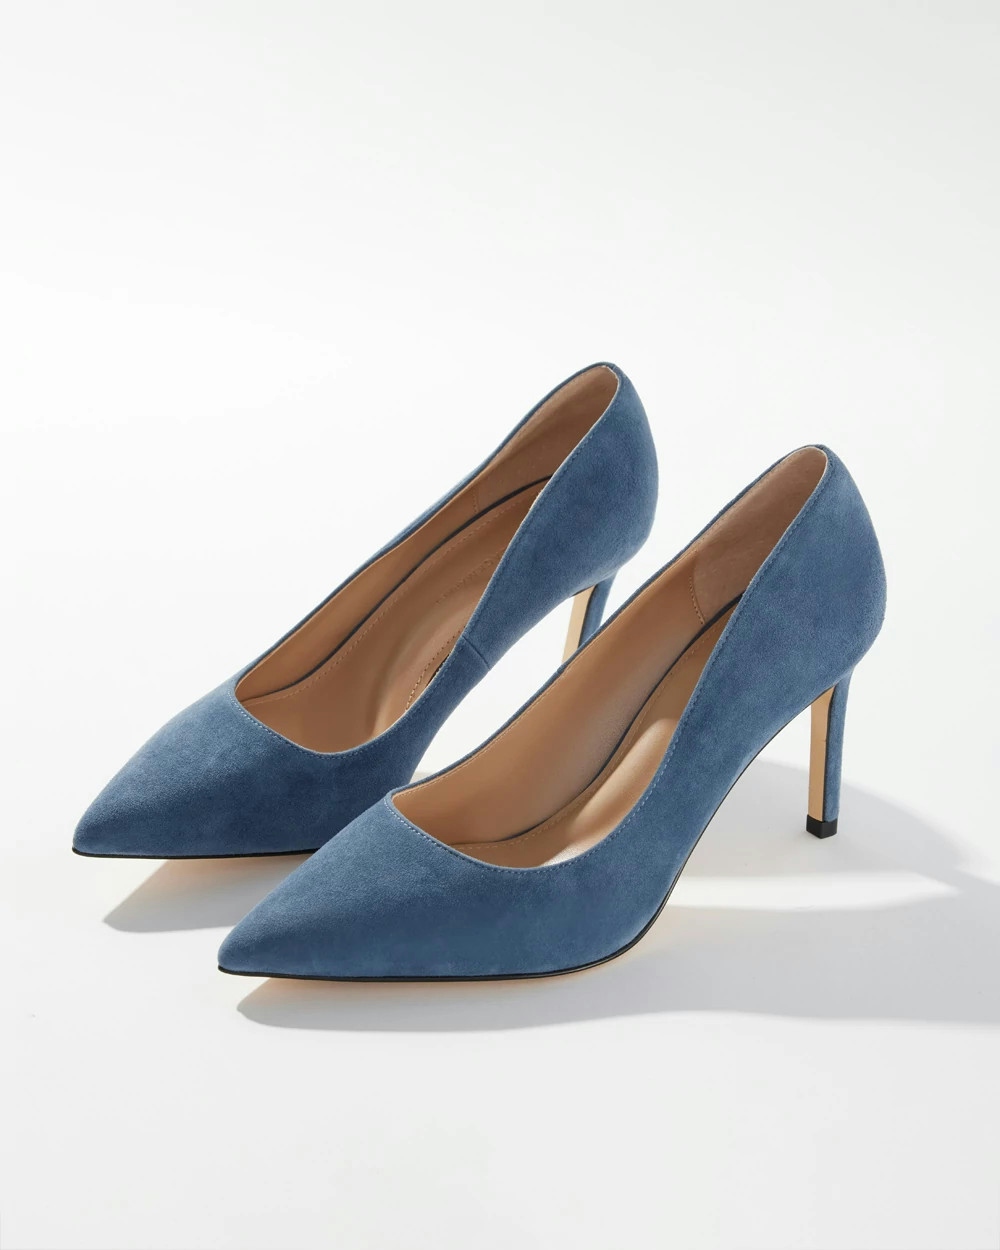 White House Black Market Suede Pumps In Light Navy